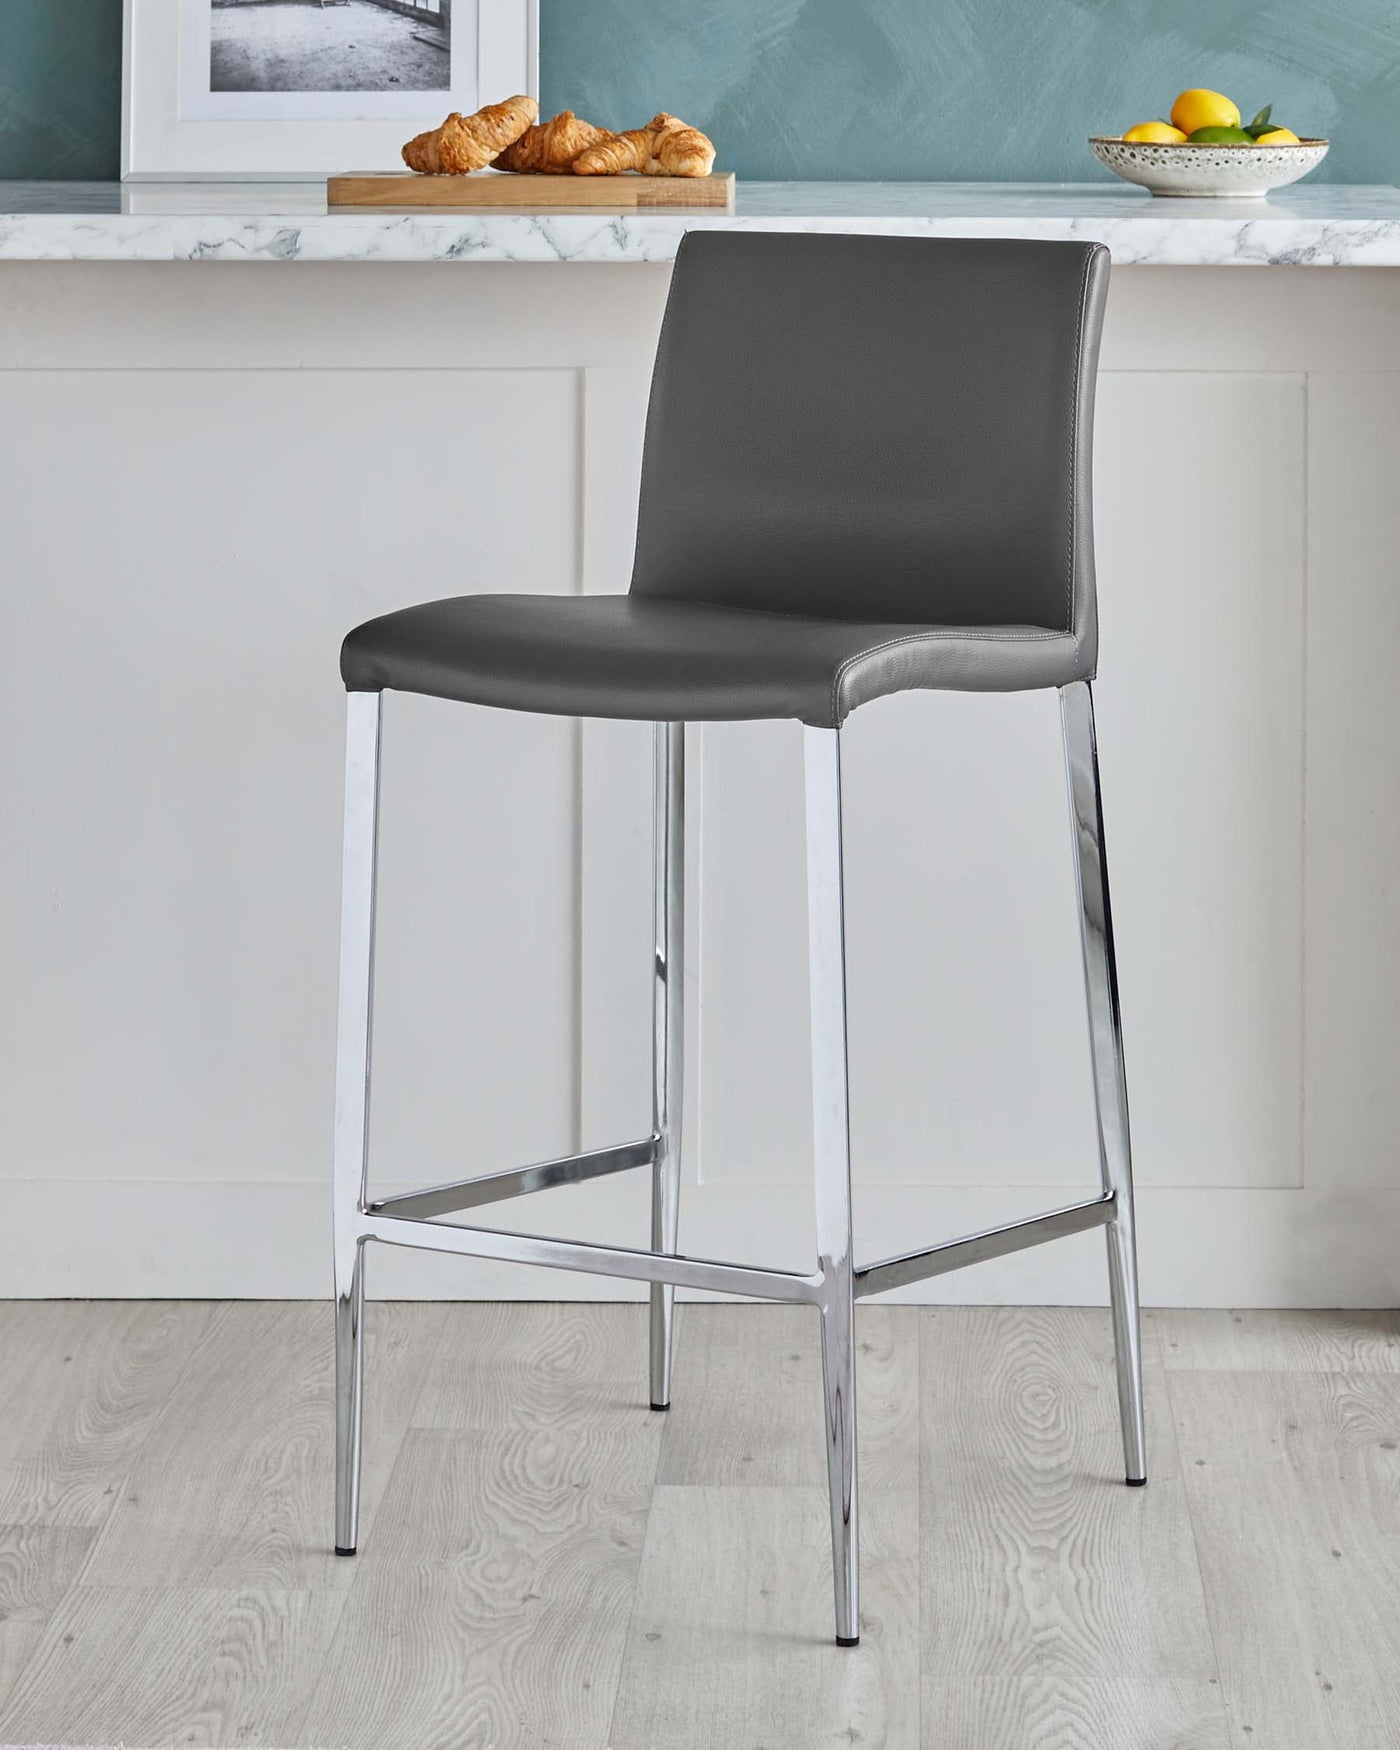 Modern black leatherette bar stool with a chrome-plated steel frame, featuring a high backrest and slender legs with a square footrest.